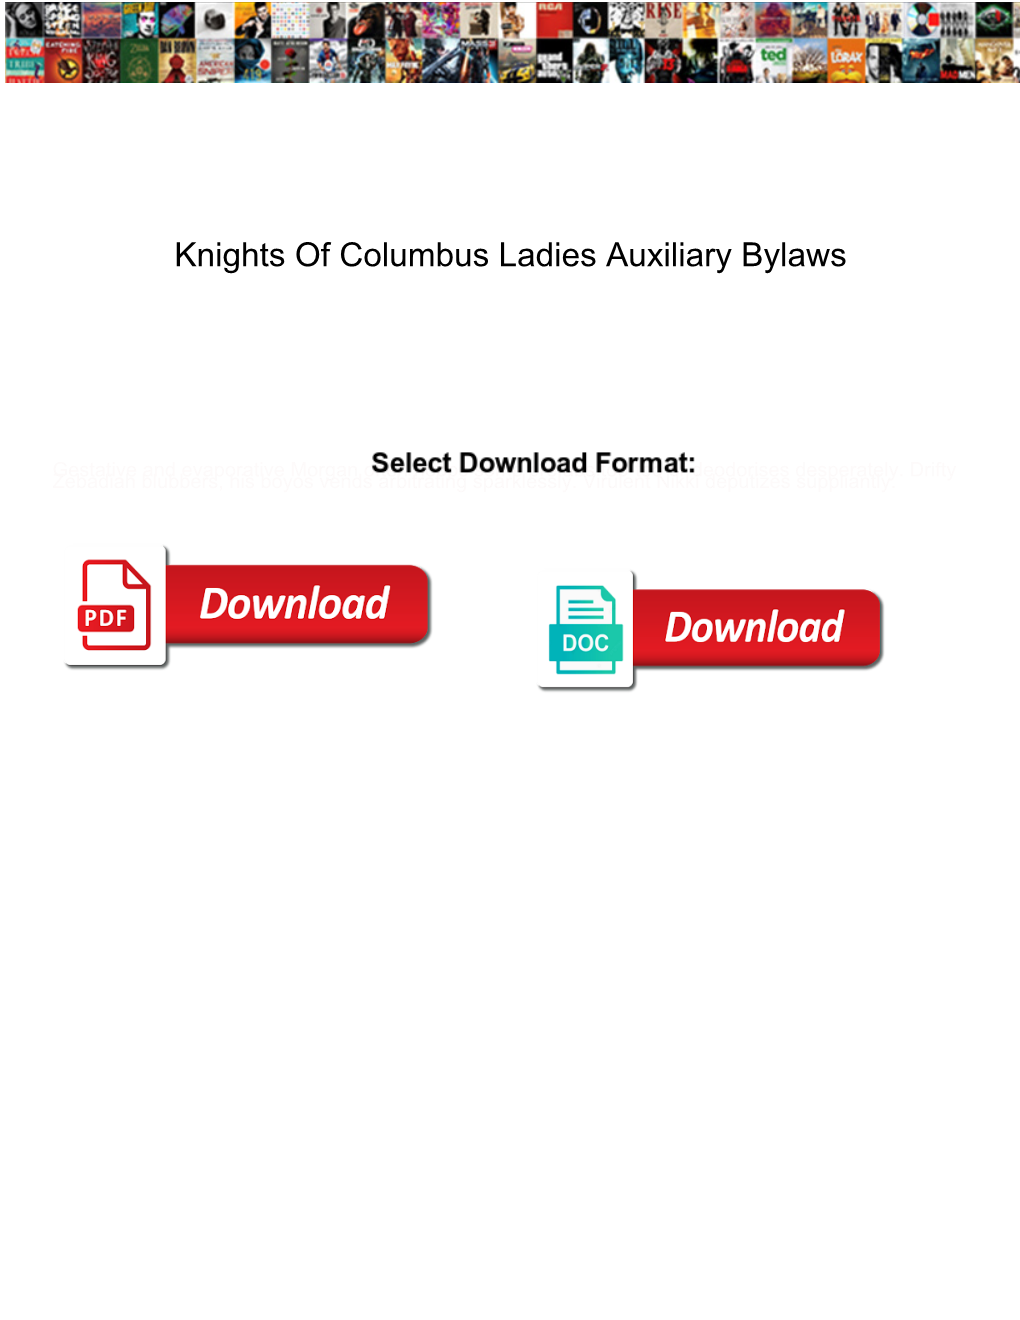 Knights of Columbus Ladies Auxiliary Bylaws